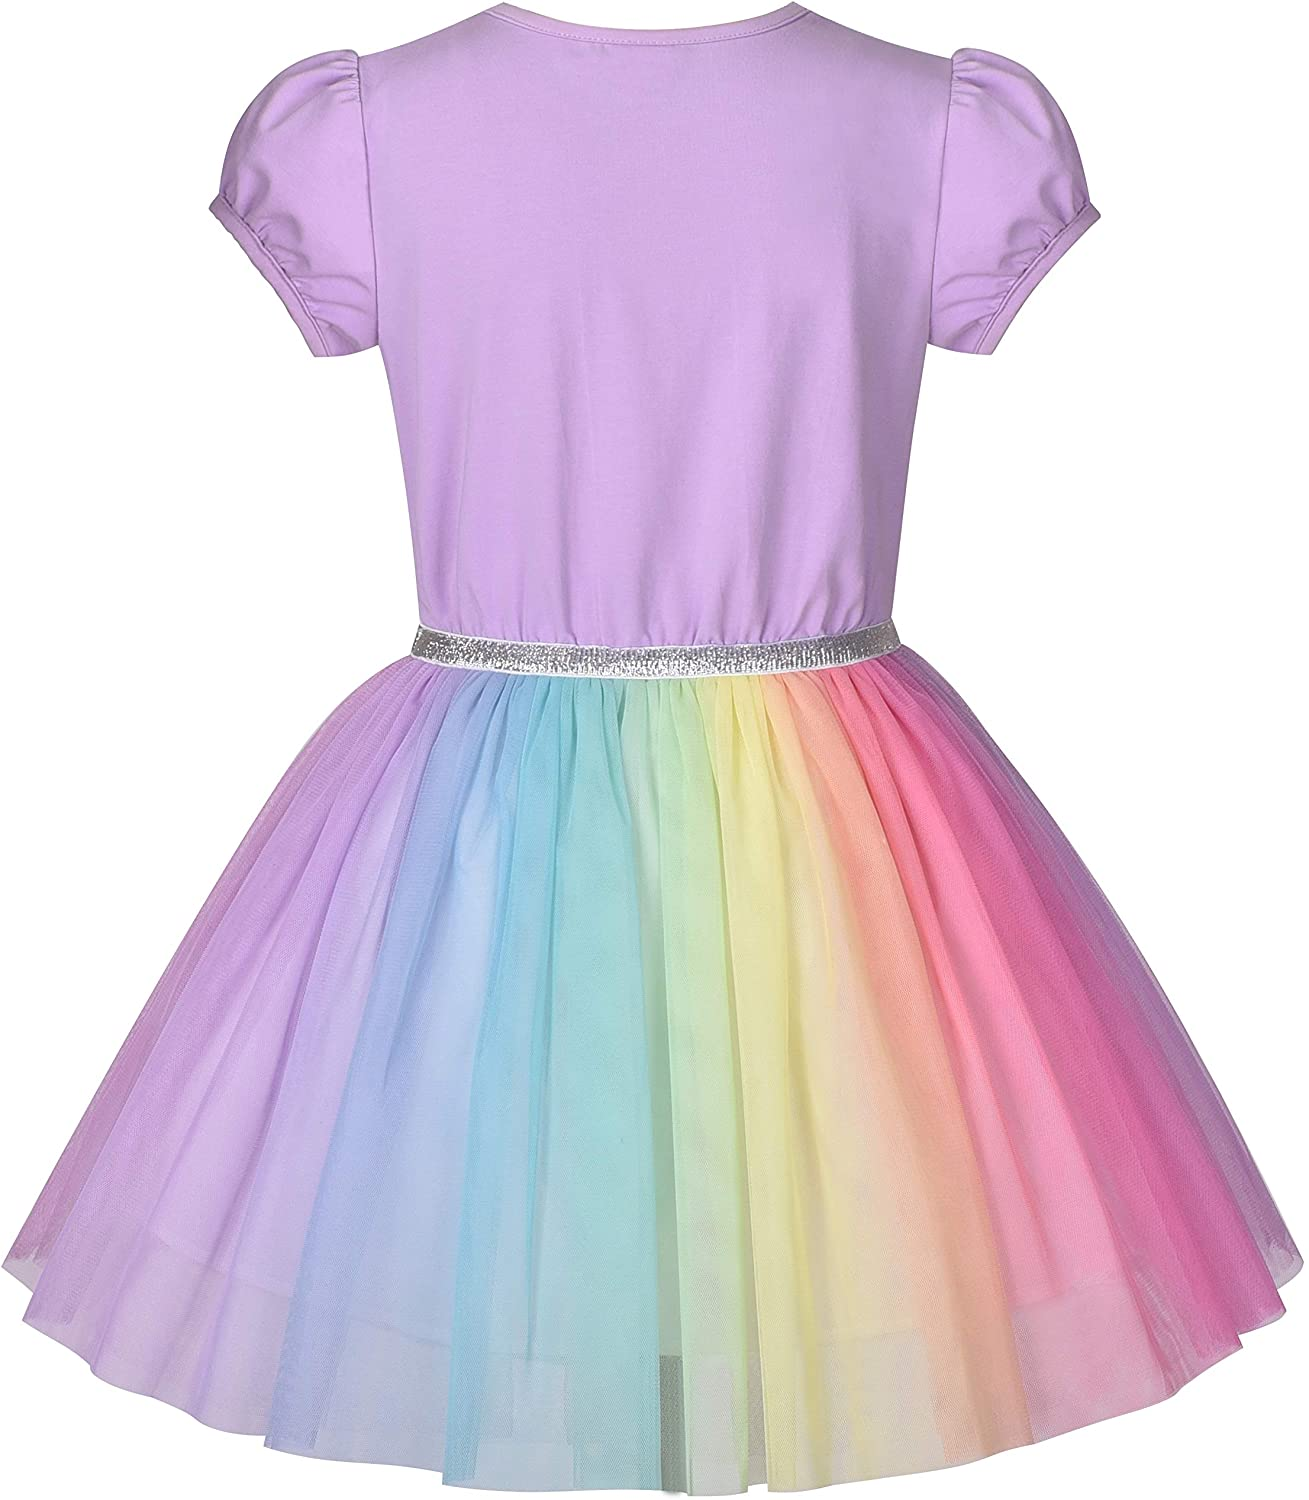 "Purple Short Sleeve Rainbow Tulle Skirt Dress for Girls - Perfect for Birthday Parties"